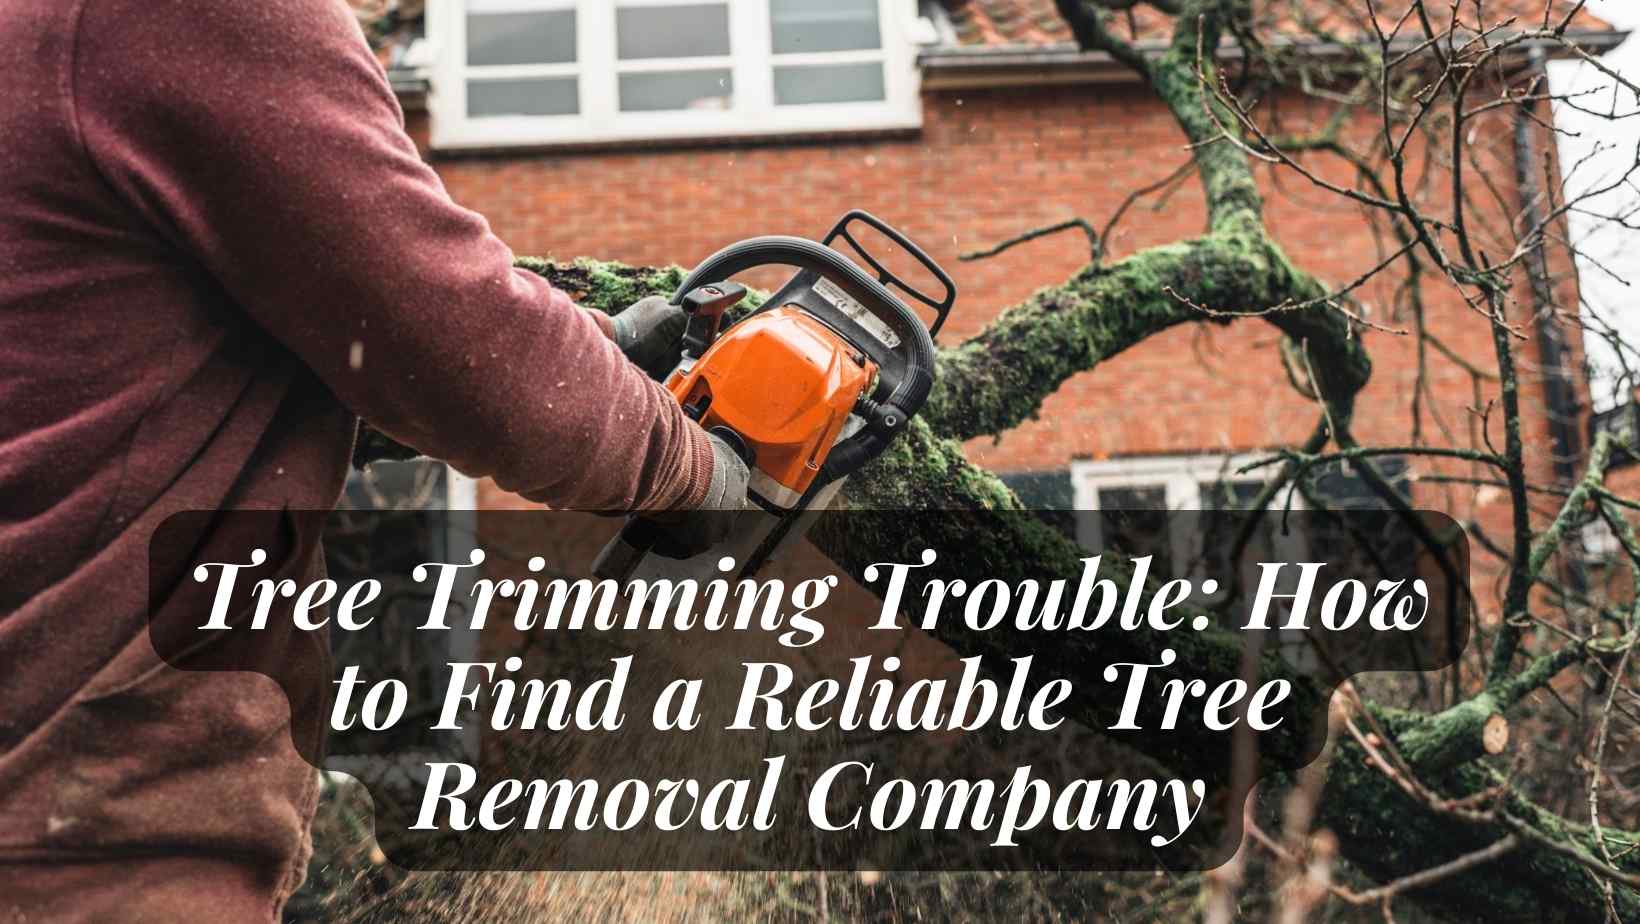 Tree Trimming Trouble: How to Find a Reliable Tree Removal Company